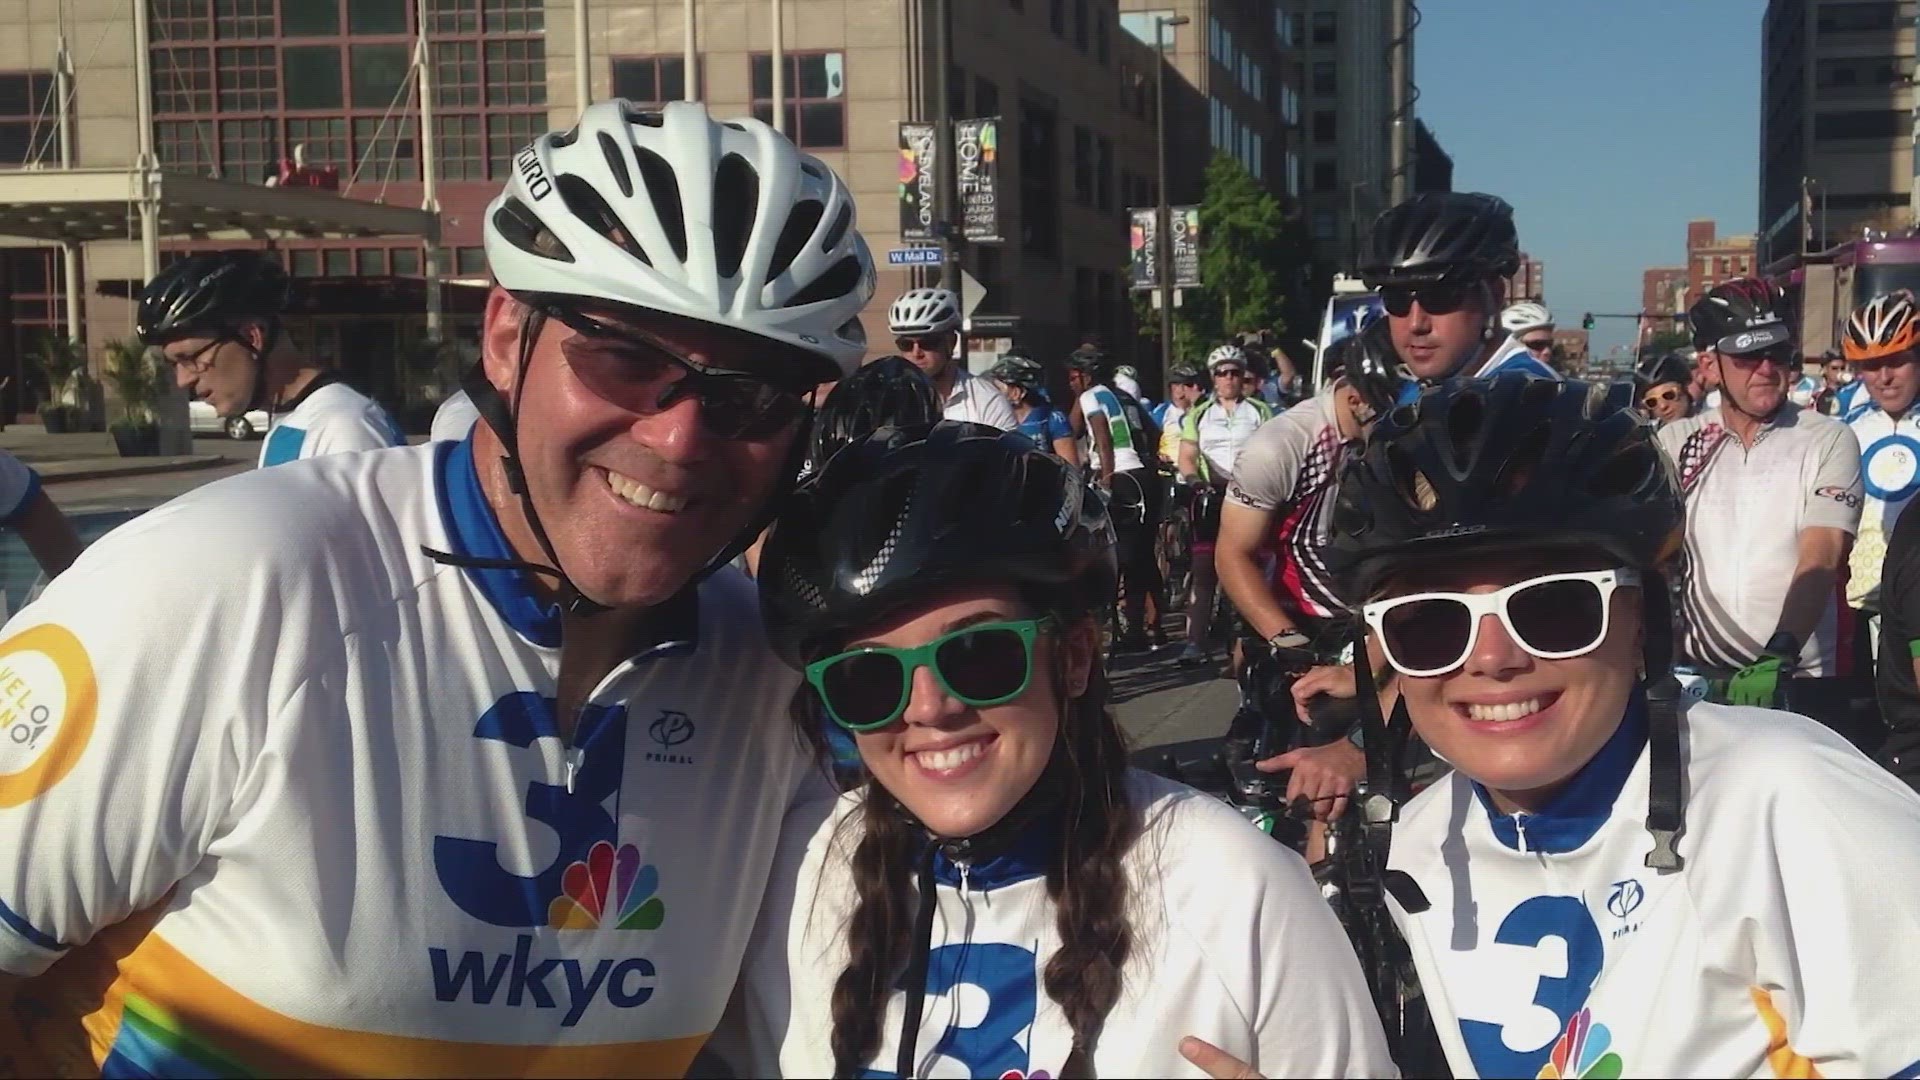 The annual Velosano 'Bike to Cure' is this weekend in Cleveland.